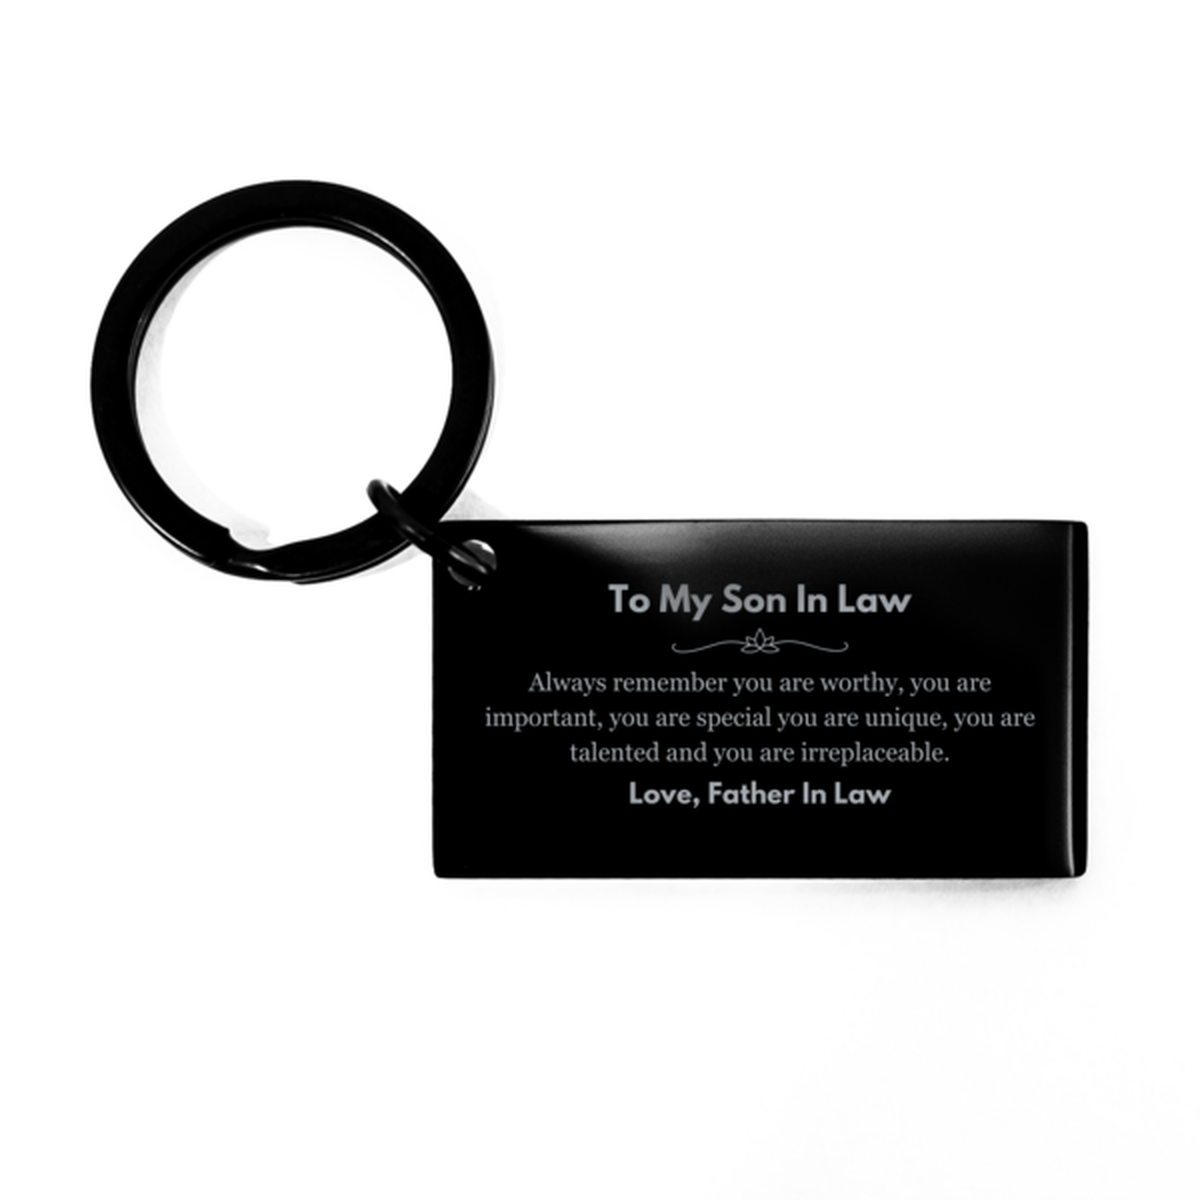 Son In Law Birthday Gifts from Father In Law, Inspirational Keychain for Son In Law Christmas Graduation Gifts for Son In Law Always remember you are worthy, you are important. Love, Father In Law